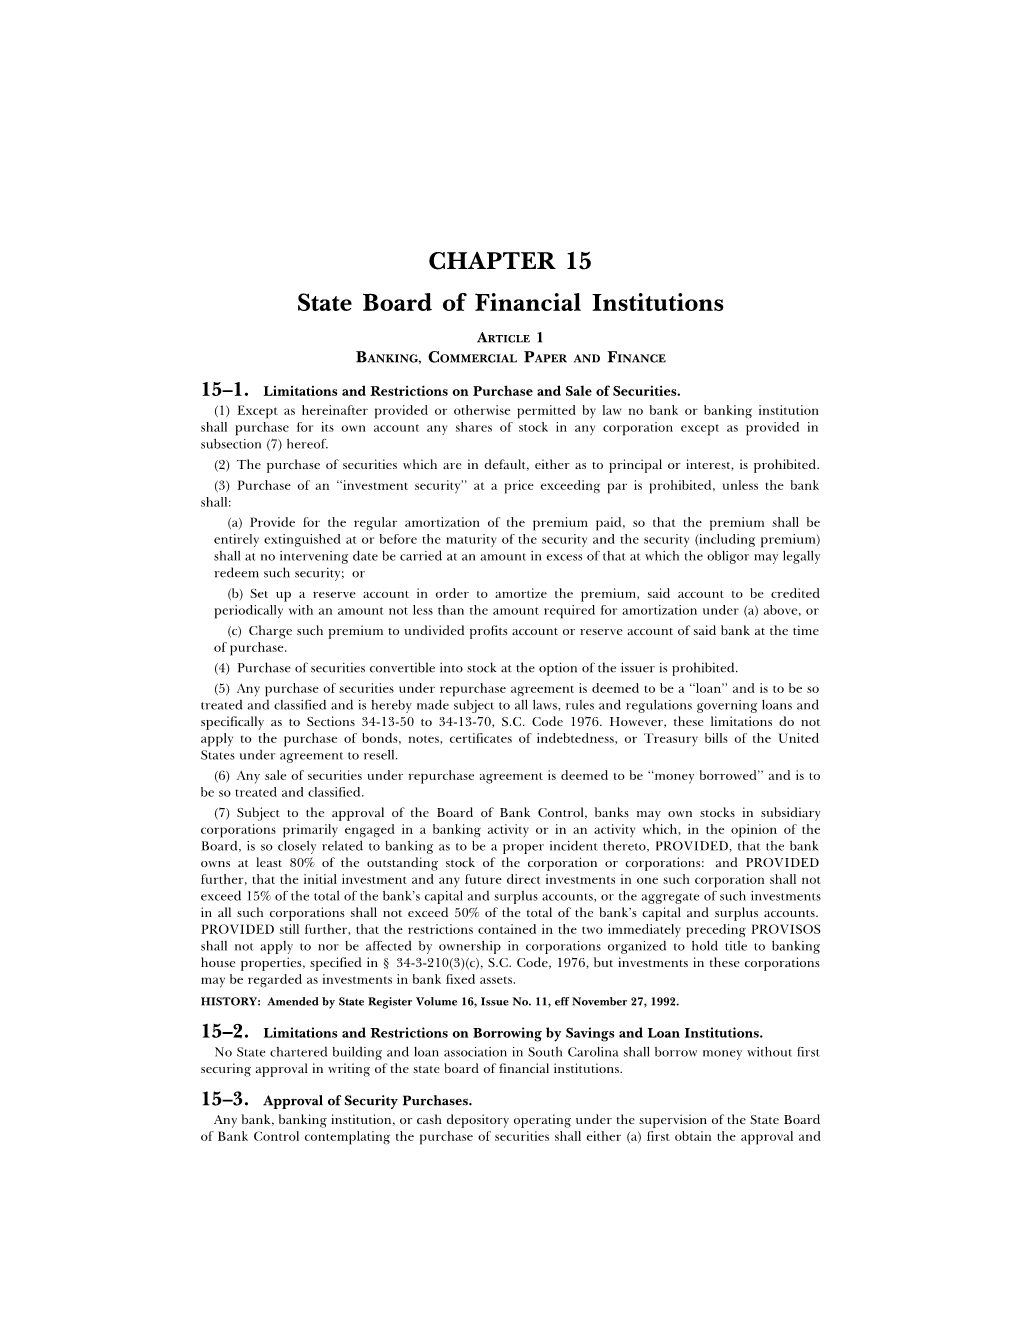 CHAPTER 15 State Board of Financial Institutions